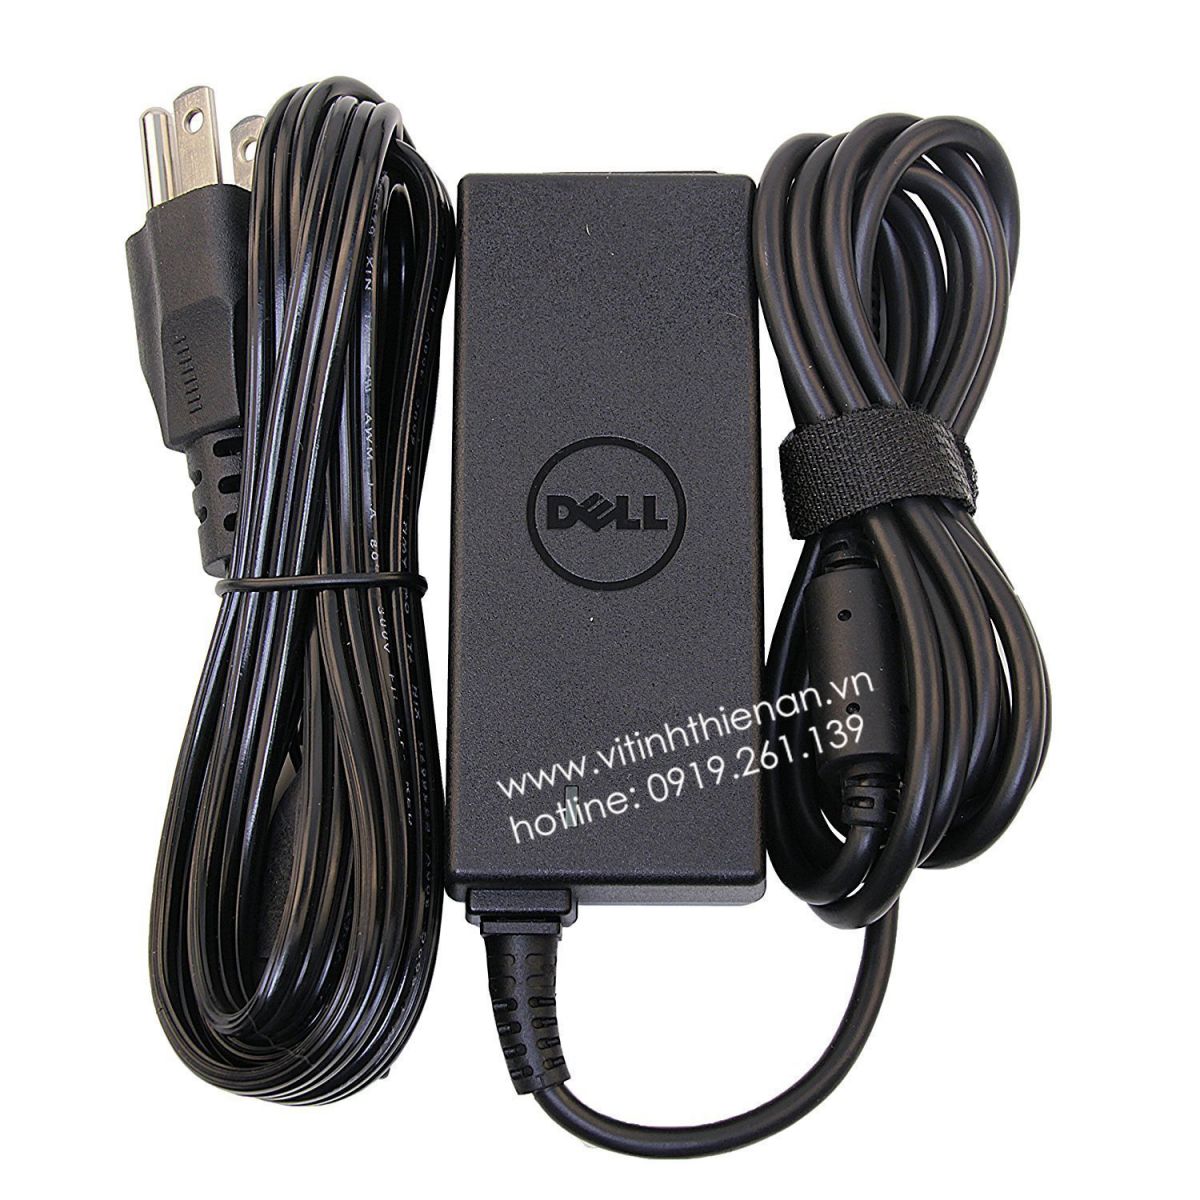 thay-sac-adapter-laptop-dell-gia-re-chinh-hang-hcm-1694 title=